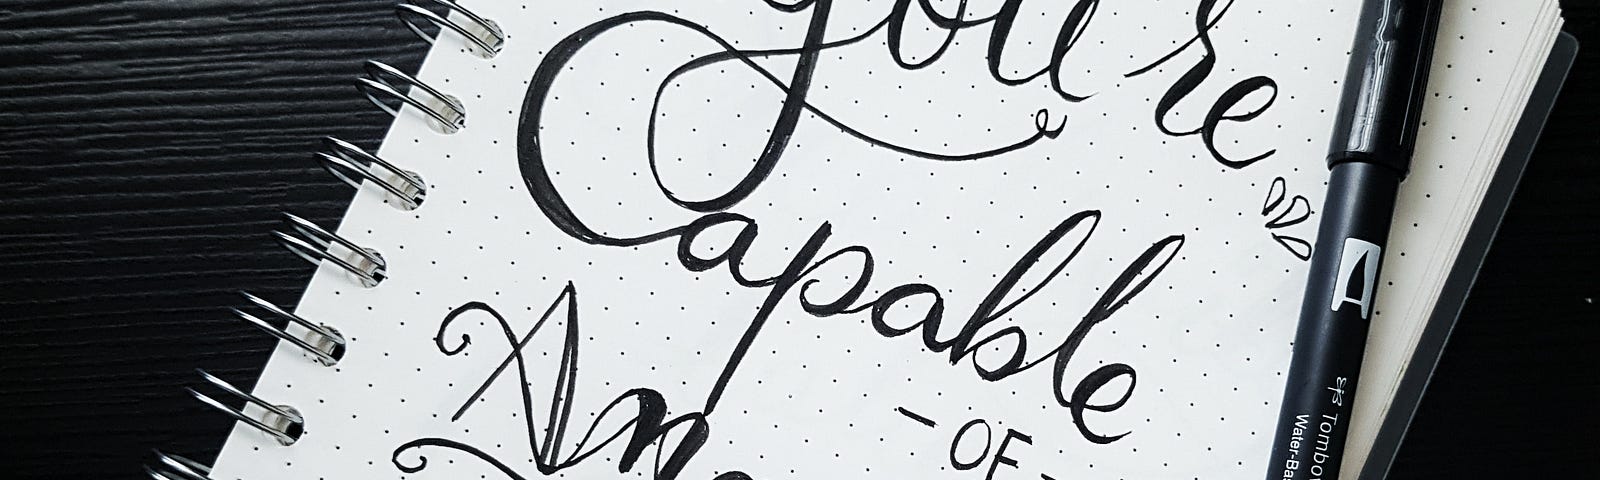 “You’re capable of amazing things” written in bold cursive on a notebook page